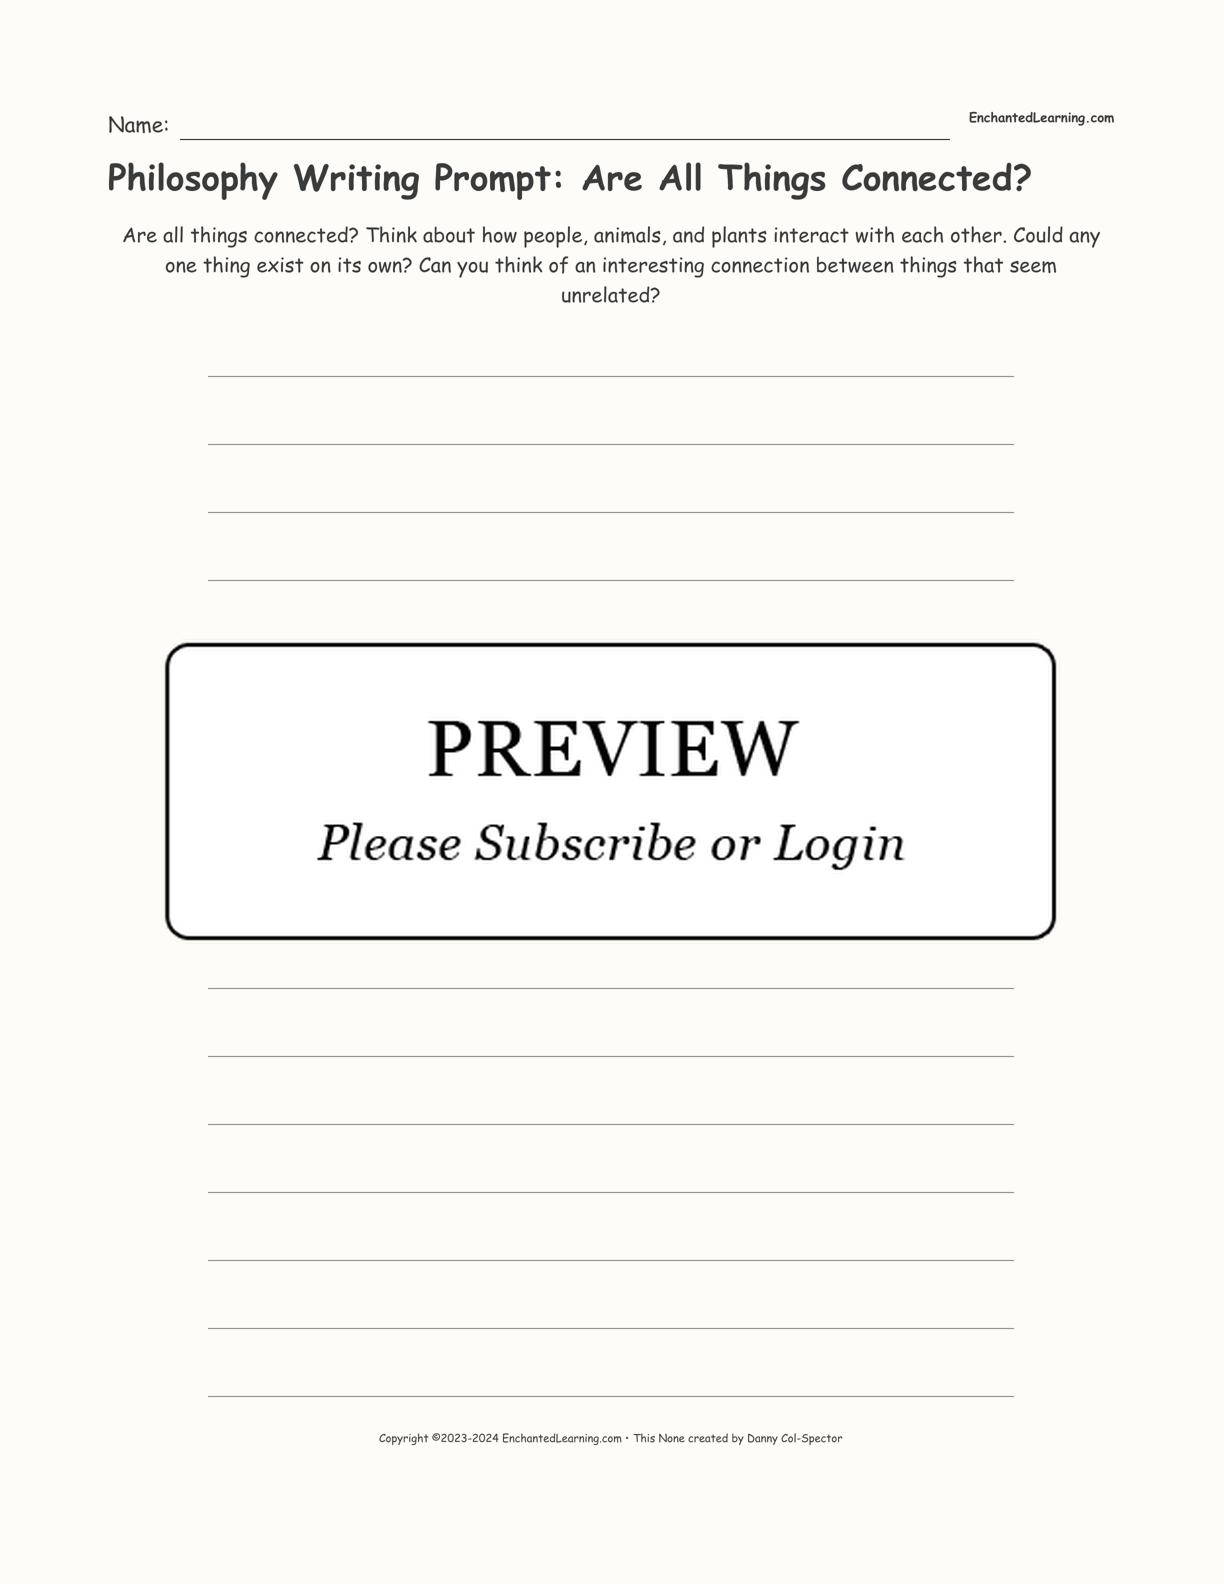 Philosophy Writing Prompt: Are All Things Connected? interactive printout page 1